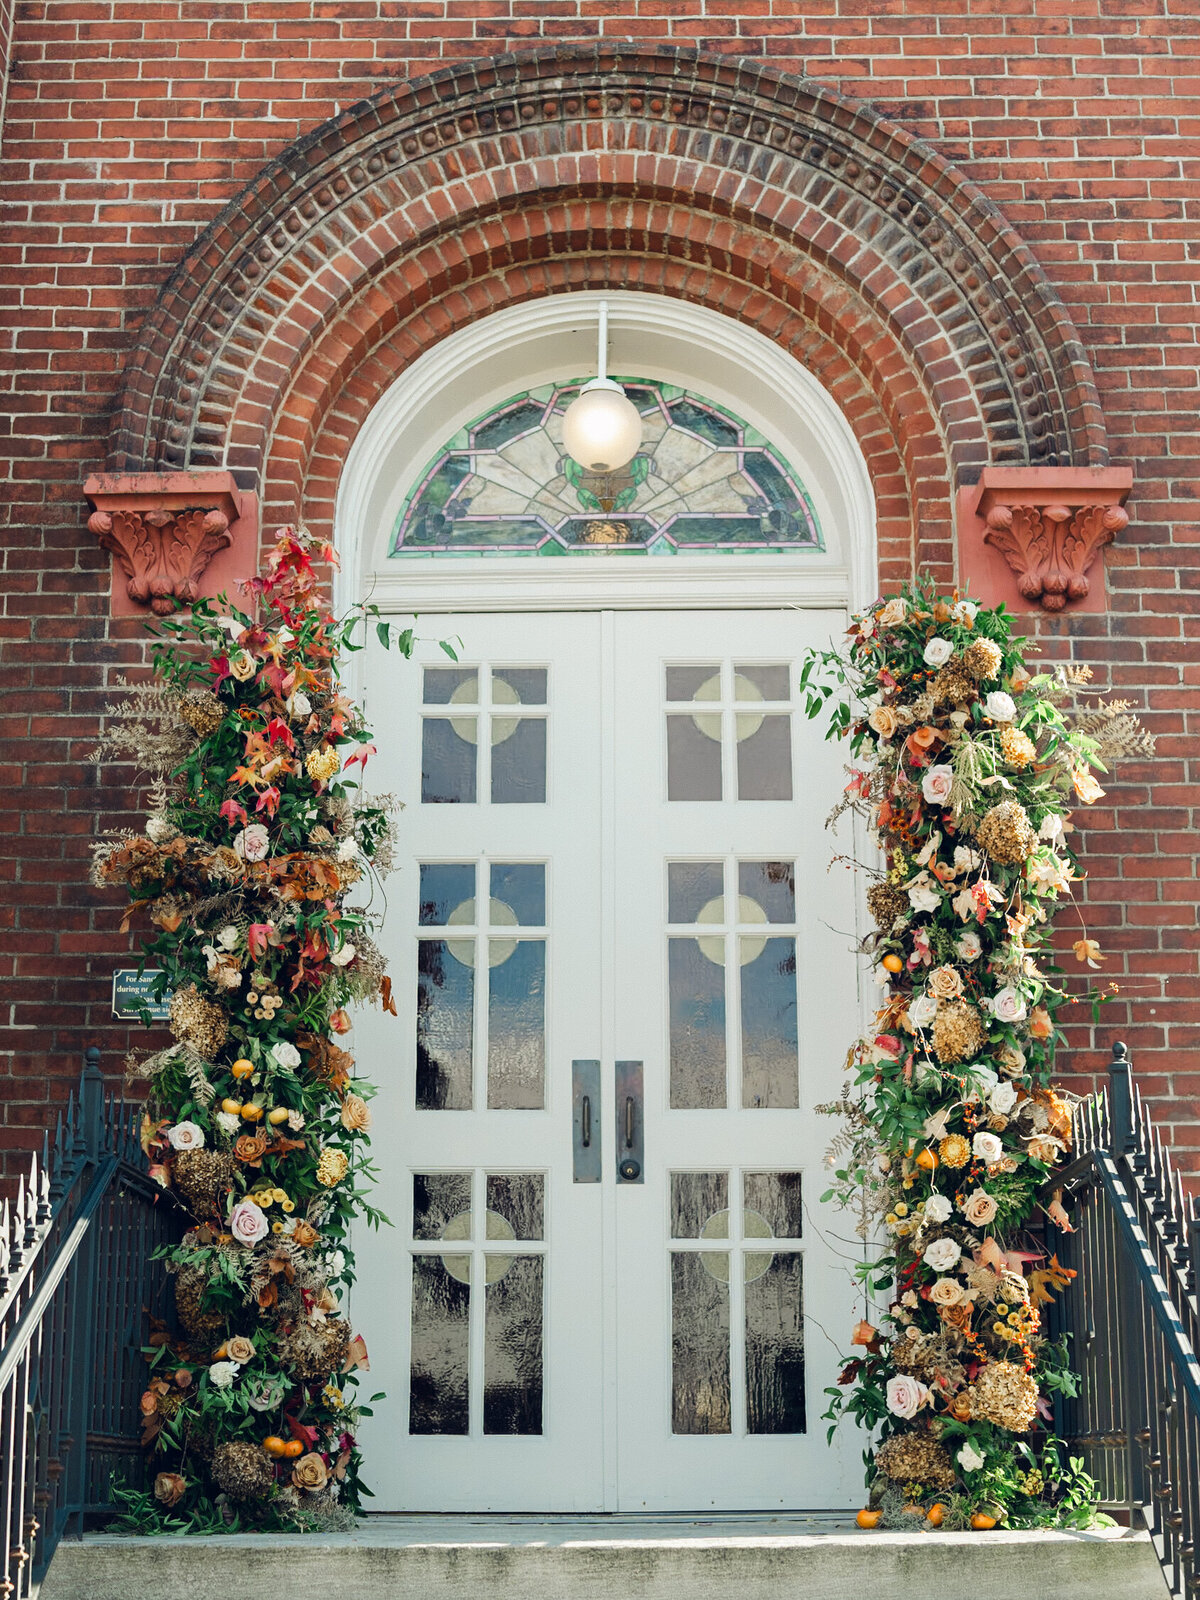 Church entrance floral installation for fall wedding in Franklin, TN. Broken arch florals for doors at church wedding ceremony. Fall wedding florals in dusty rose, caramel, honey, and copper. Floral photo moment for wedding ceremony exit. Destination wedding outside Nashville, TN. Design by Rosemary & Finch Floral Design in Nashville, TN.